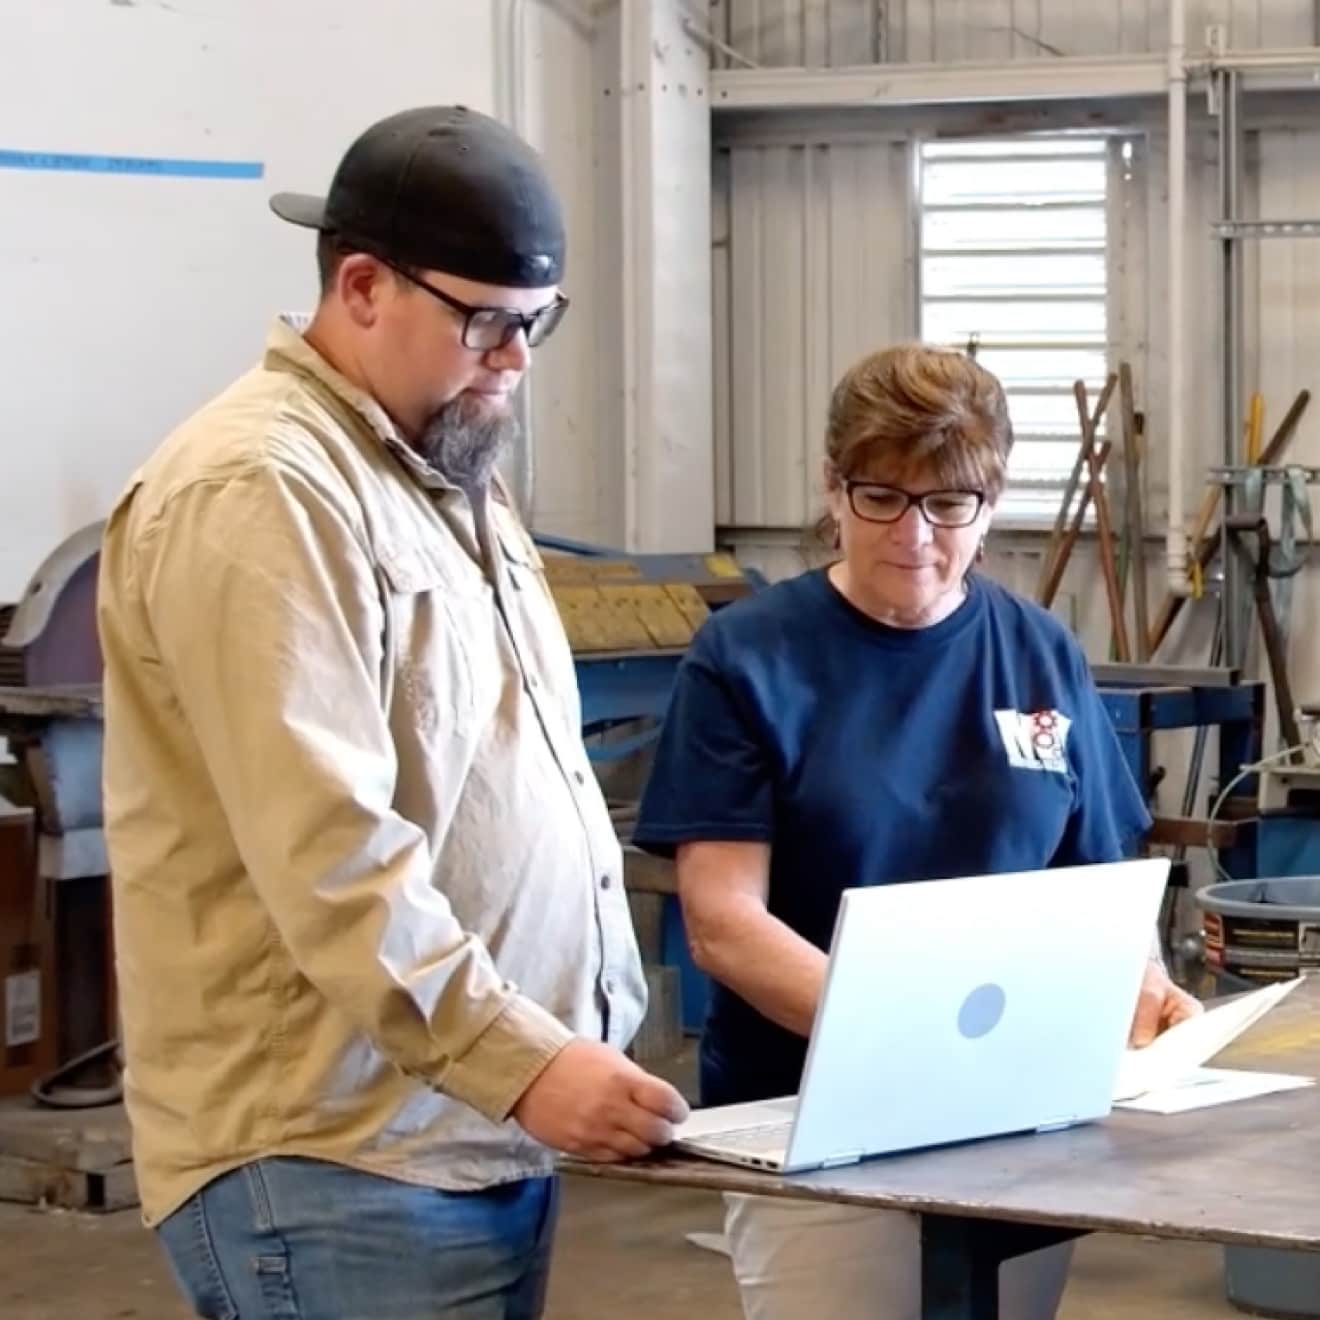 Employees of Mathews Mechanical collaborating on a laptop